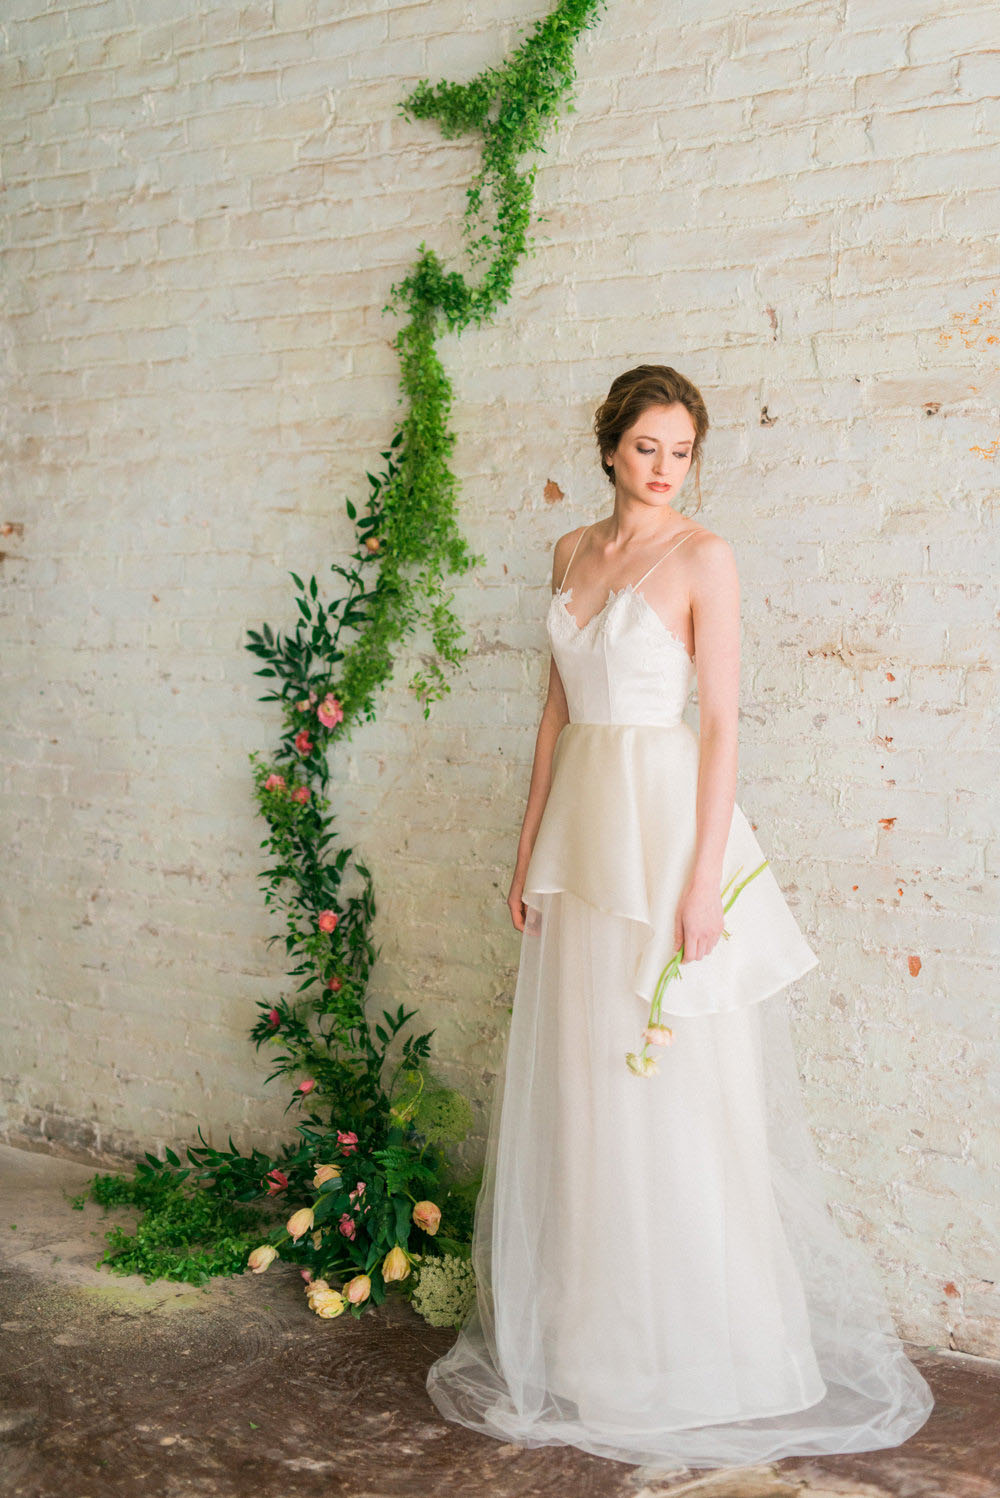 16 dreamy wedding dresses for the bride, bridesmaid & guests